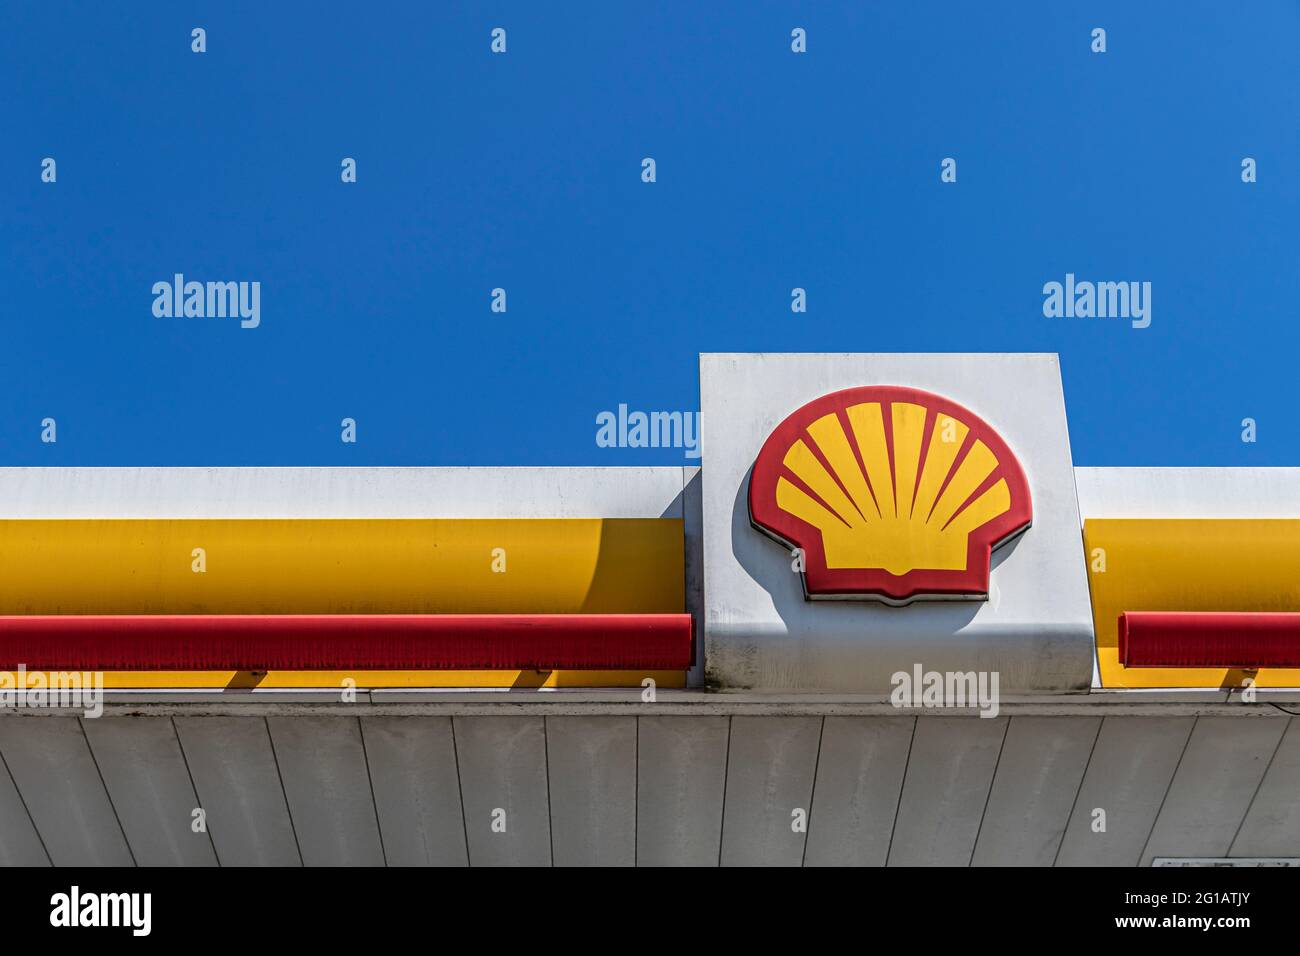 The logo of the Shell Oil Company on a Shell petrol station against a blue sky in Queenstown Road, Battersea ,SW London Stock Photo